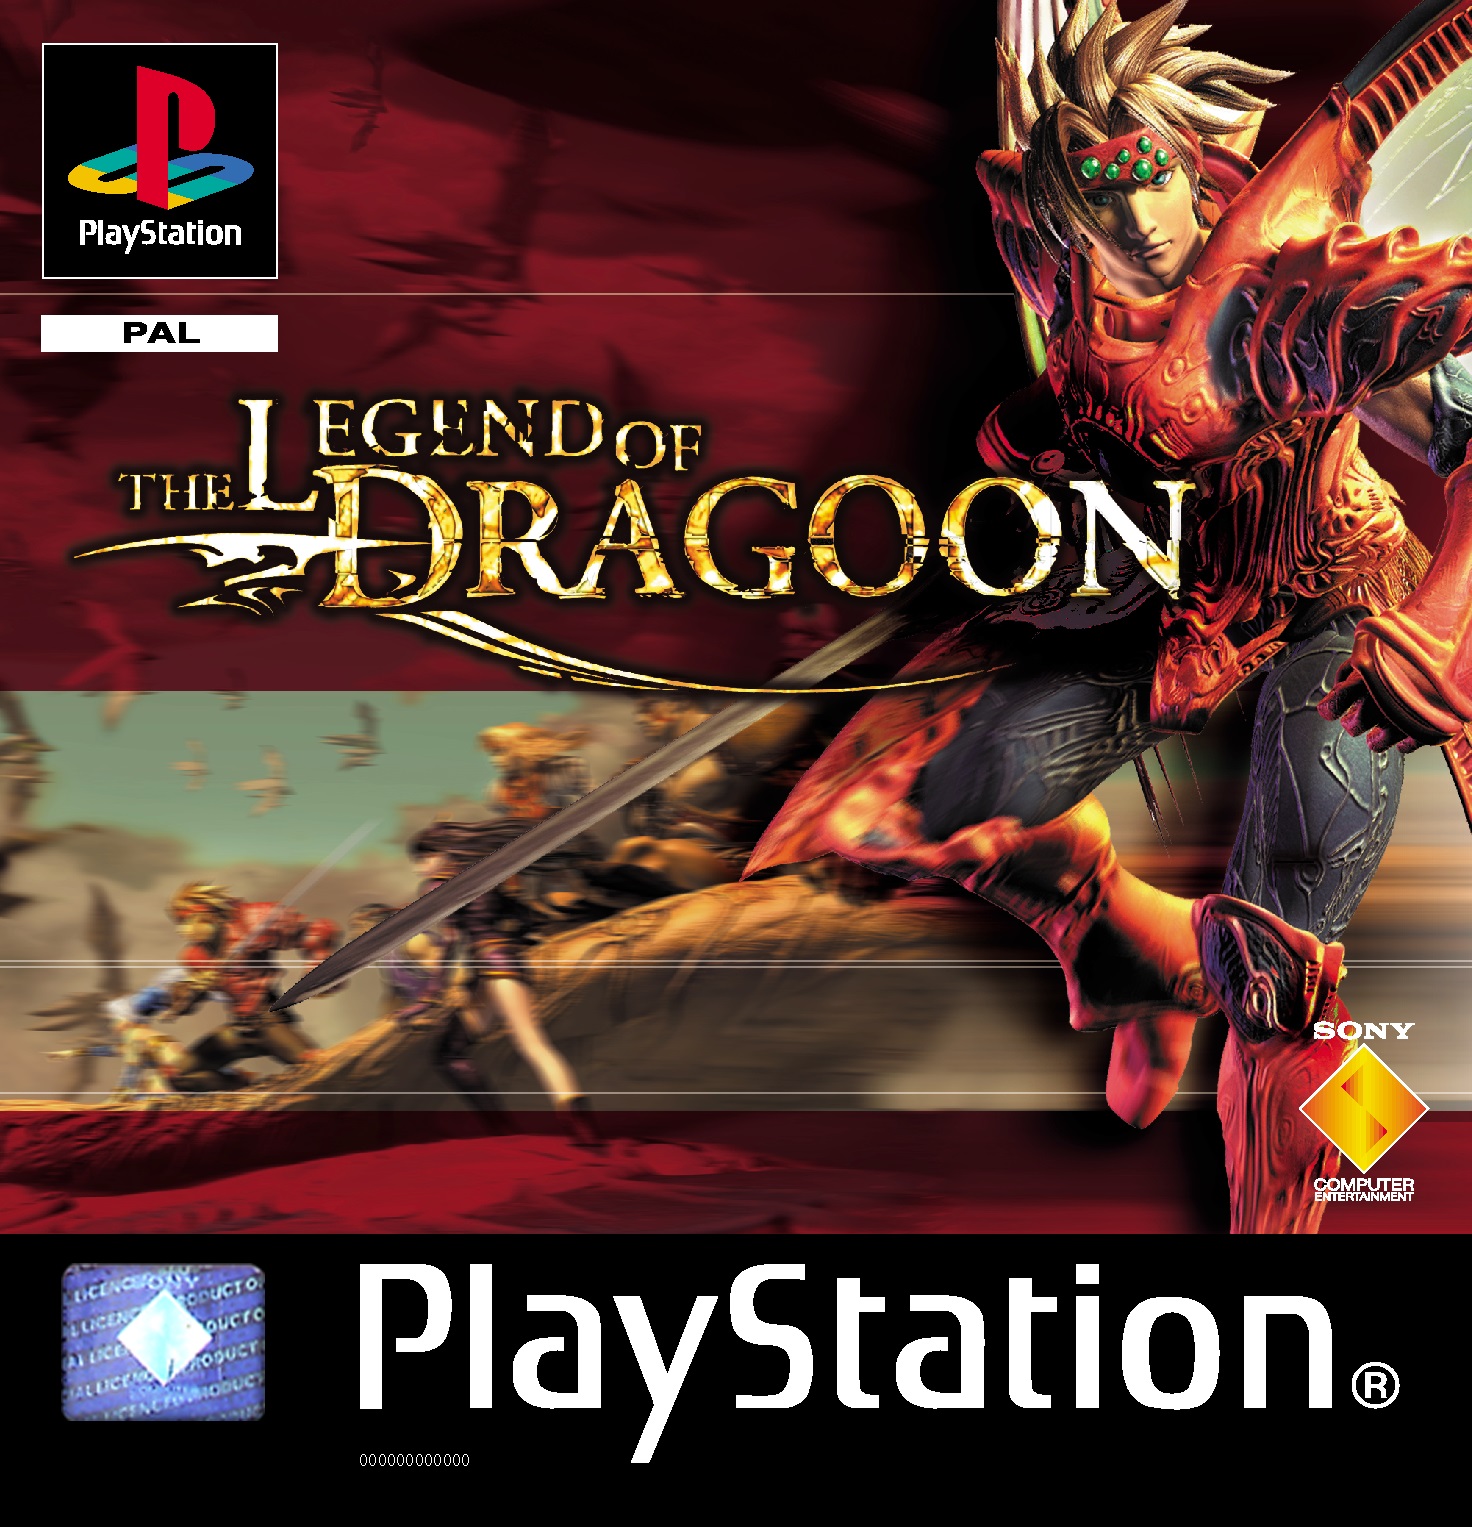 you-will-all-know-me-as-the-one-to-bring-back-the-legend-of-dragoon